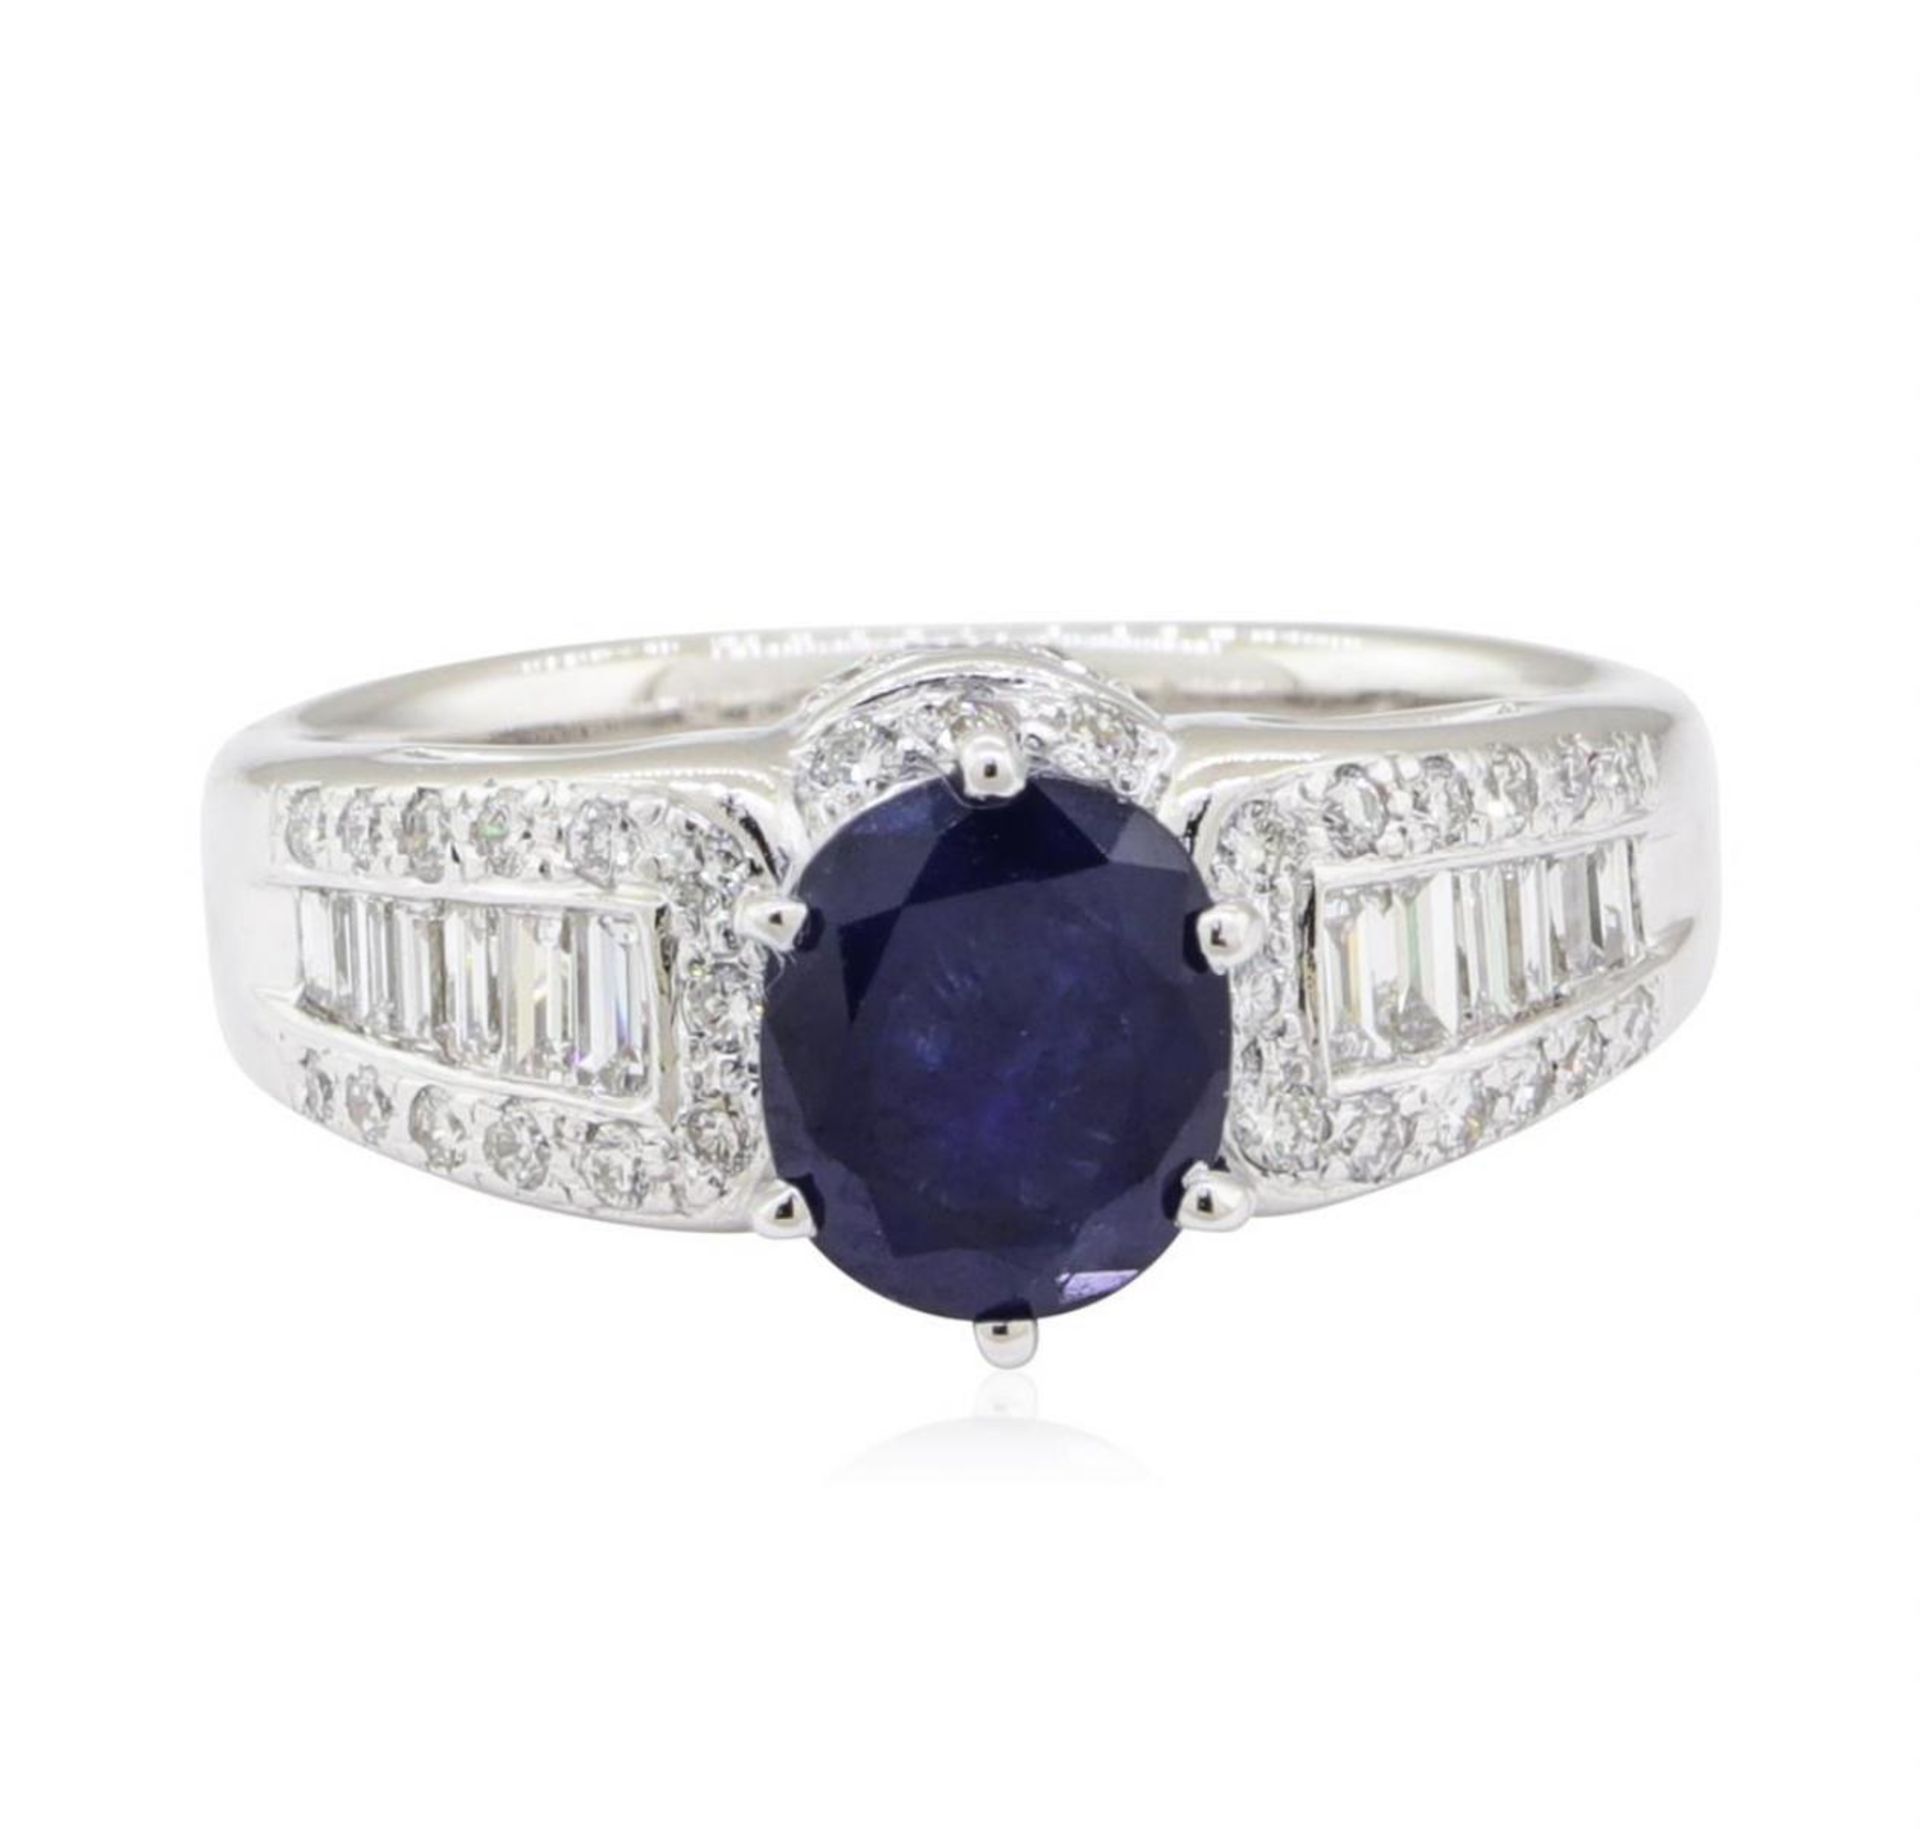 2.01 ctw Sapphire and Diamond Ring - 14KT White Gold - Image 2 of 5